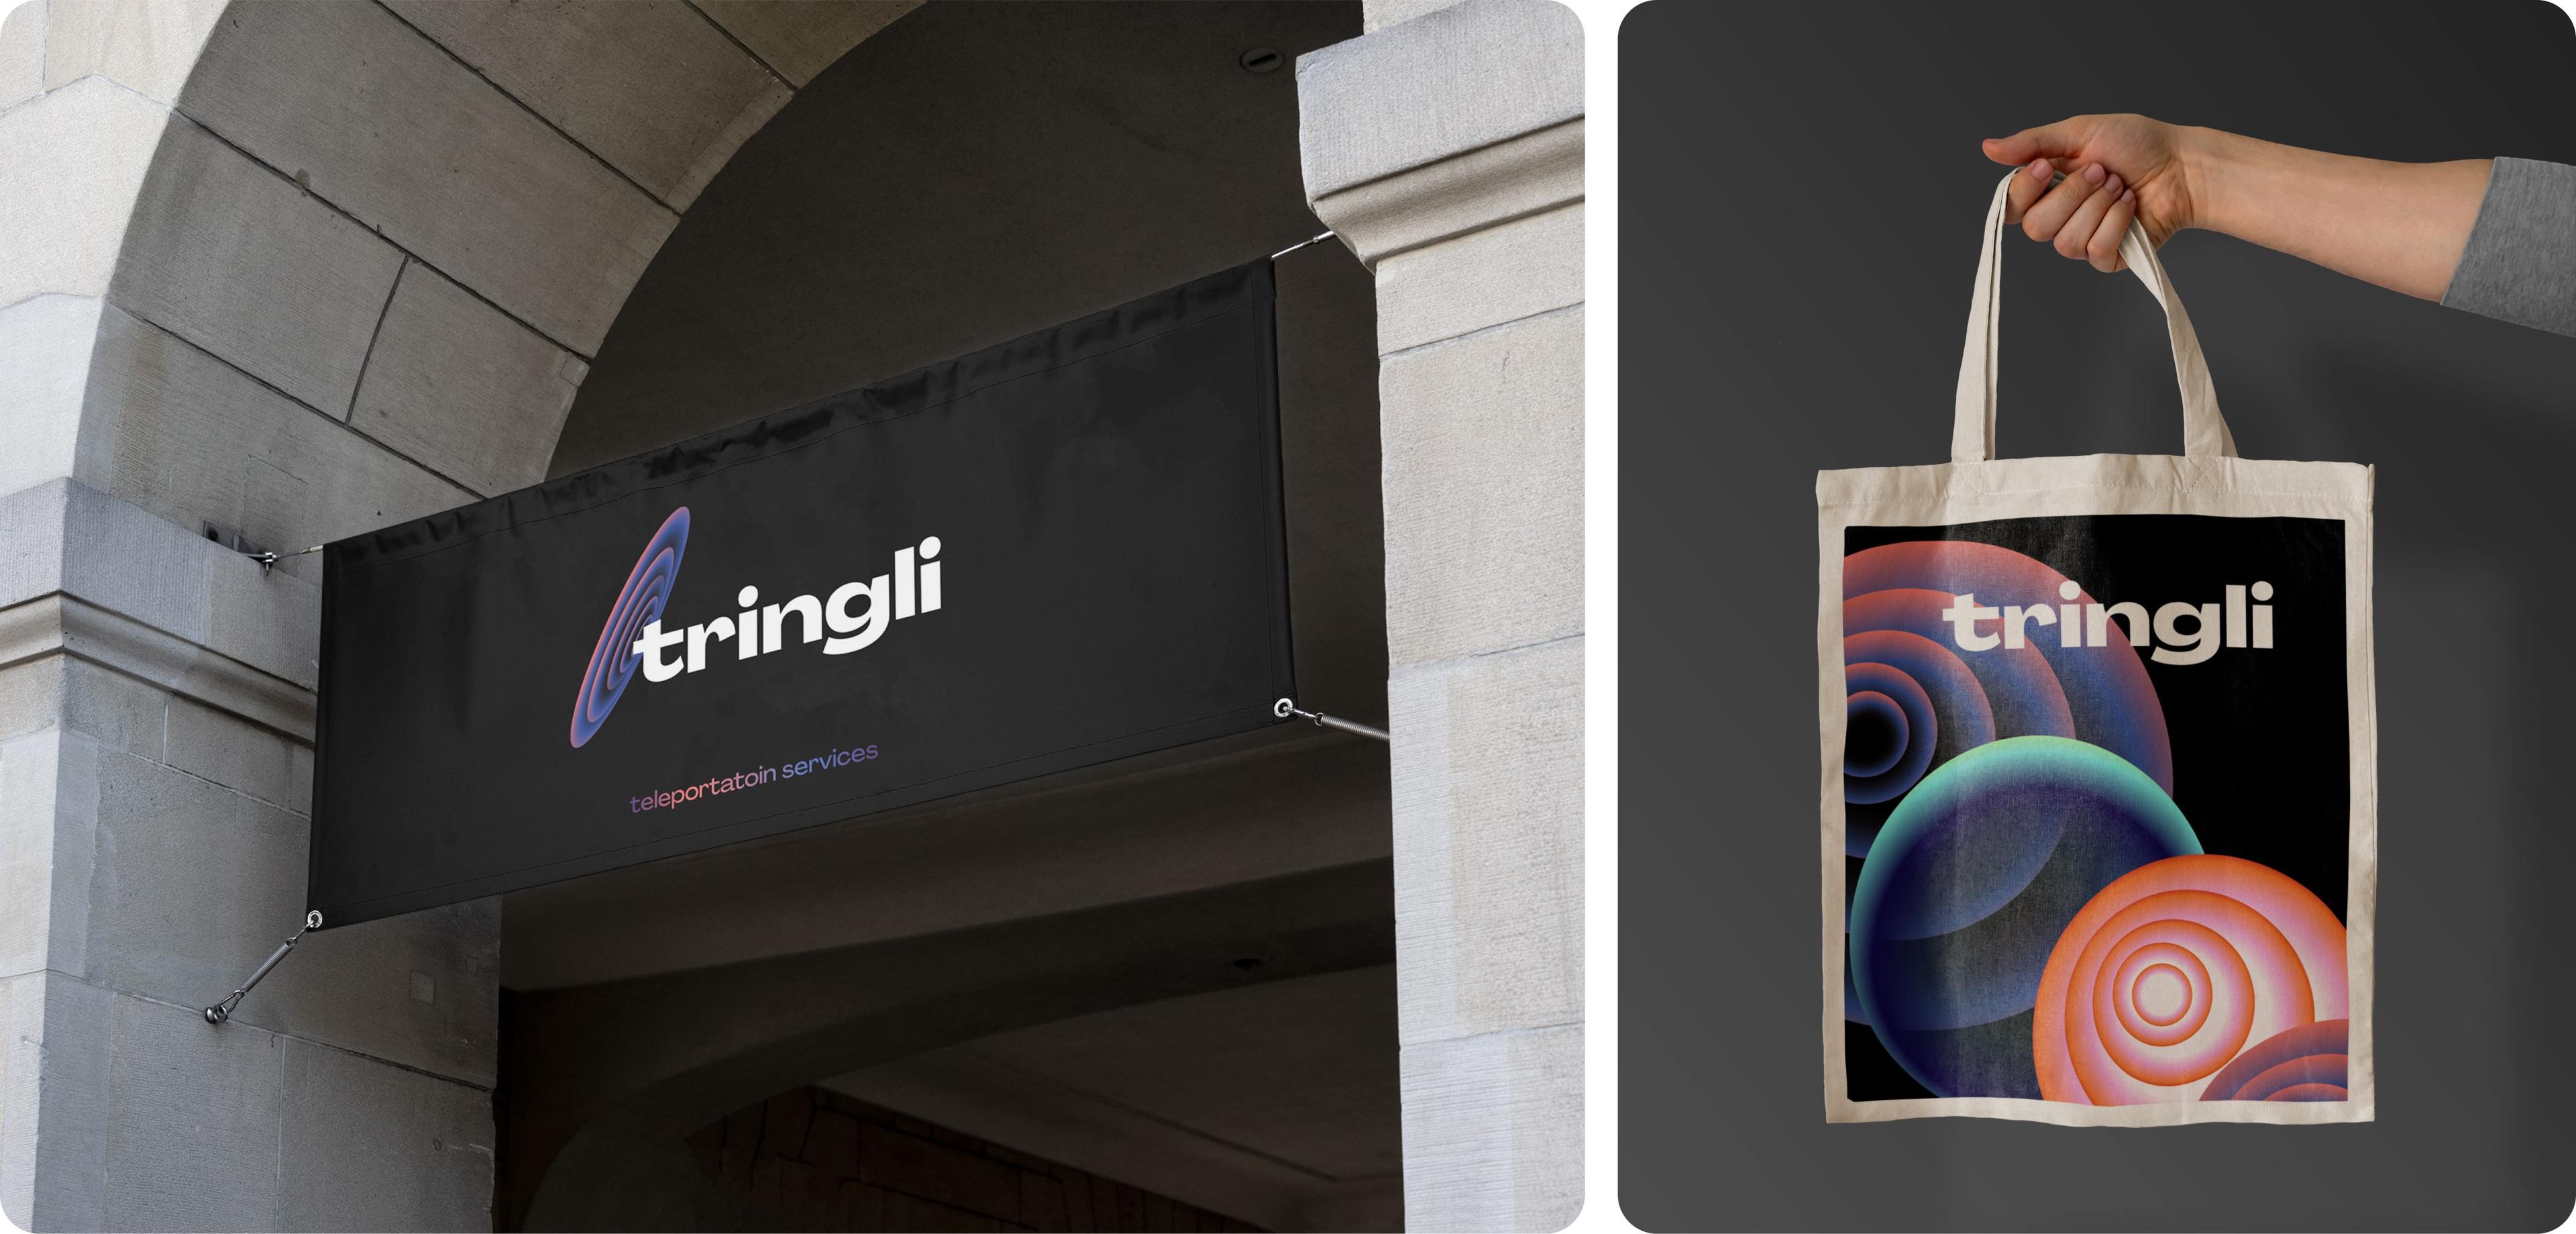 Tringli banners teleportation services